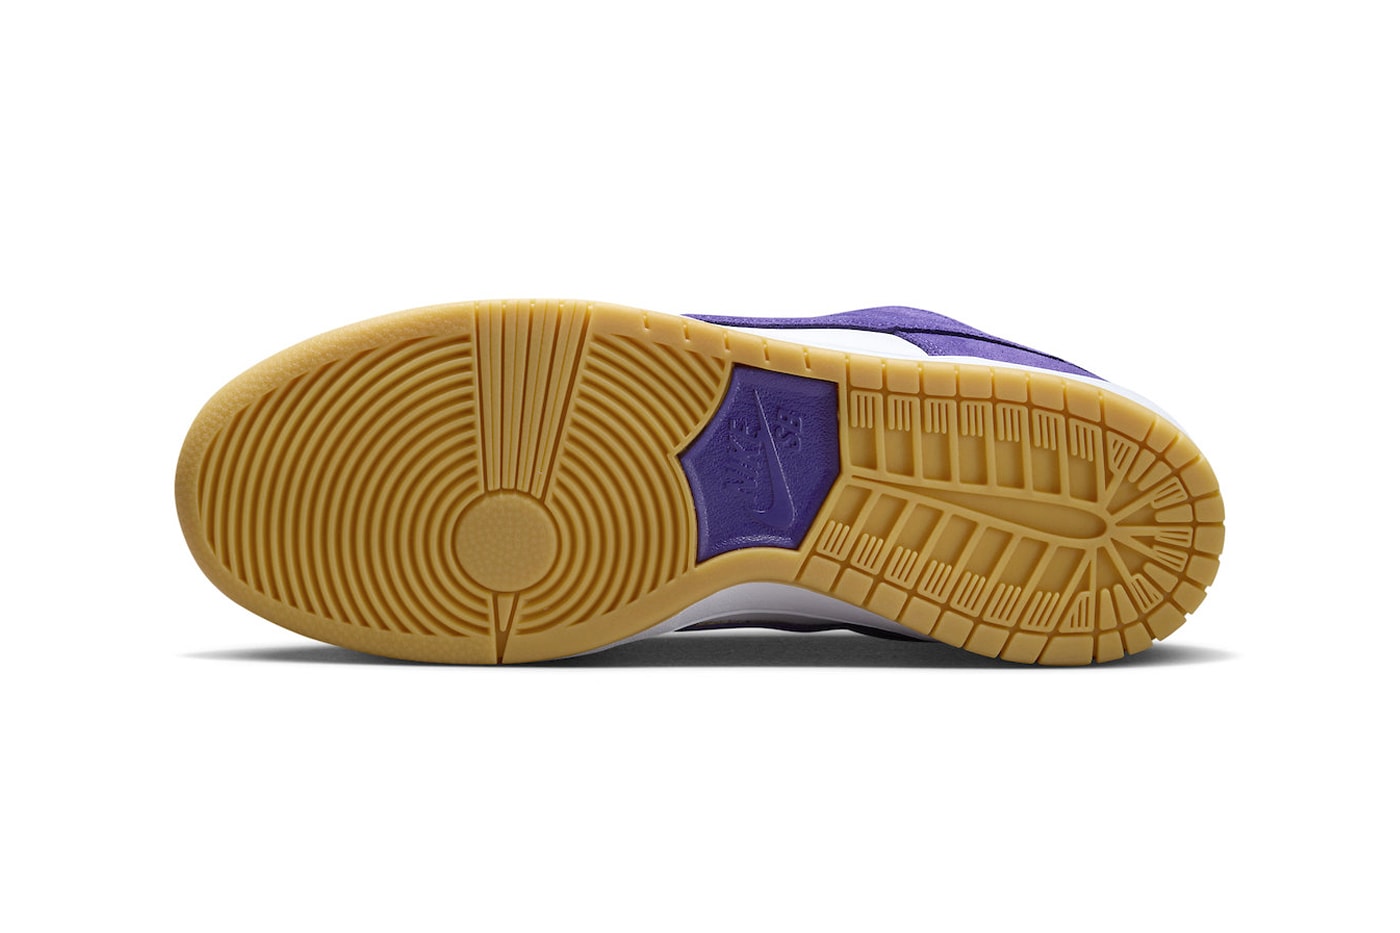 Official Look at the Nike SB Dunk Low "Court Purple" DV5464-500 Court Purple/Court Purple-White-Gum Light Brown low top los angeles lakers colors 